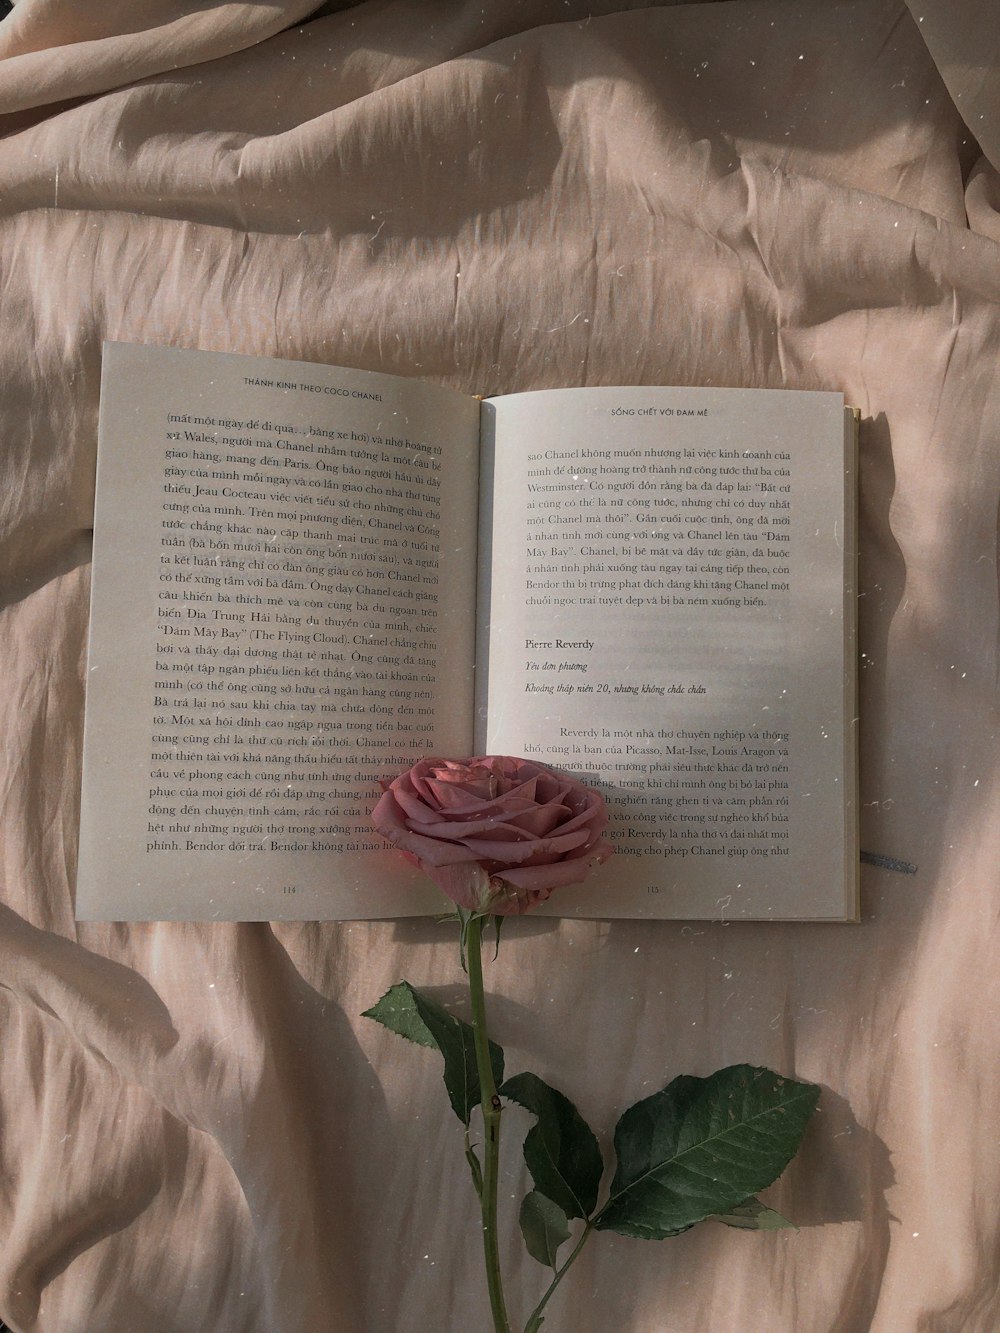 pink rose on open book